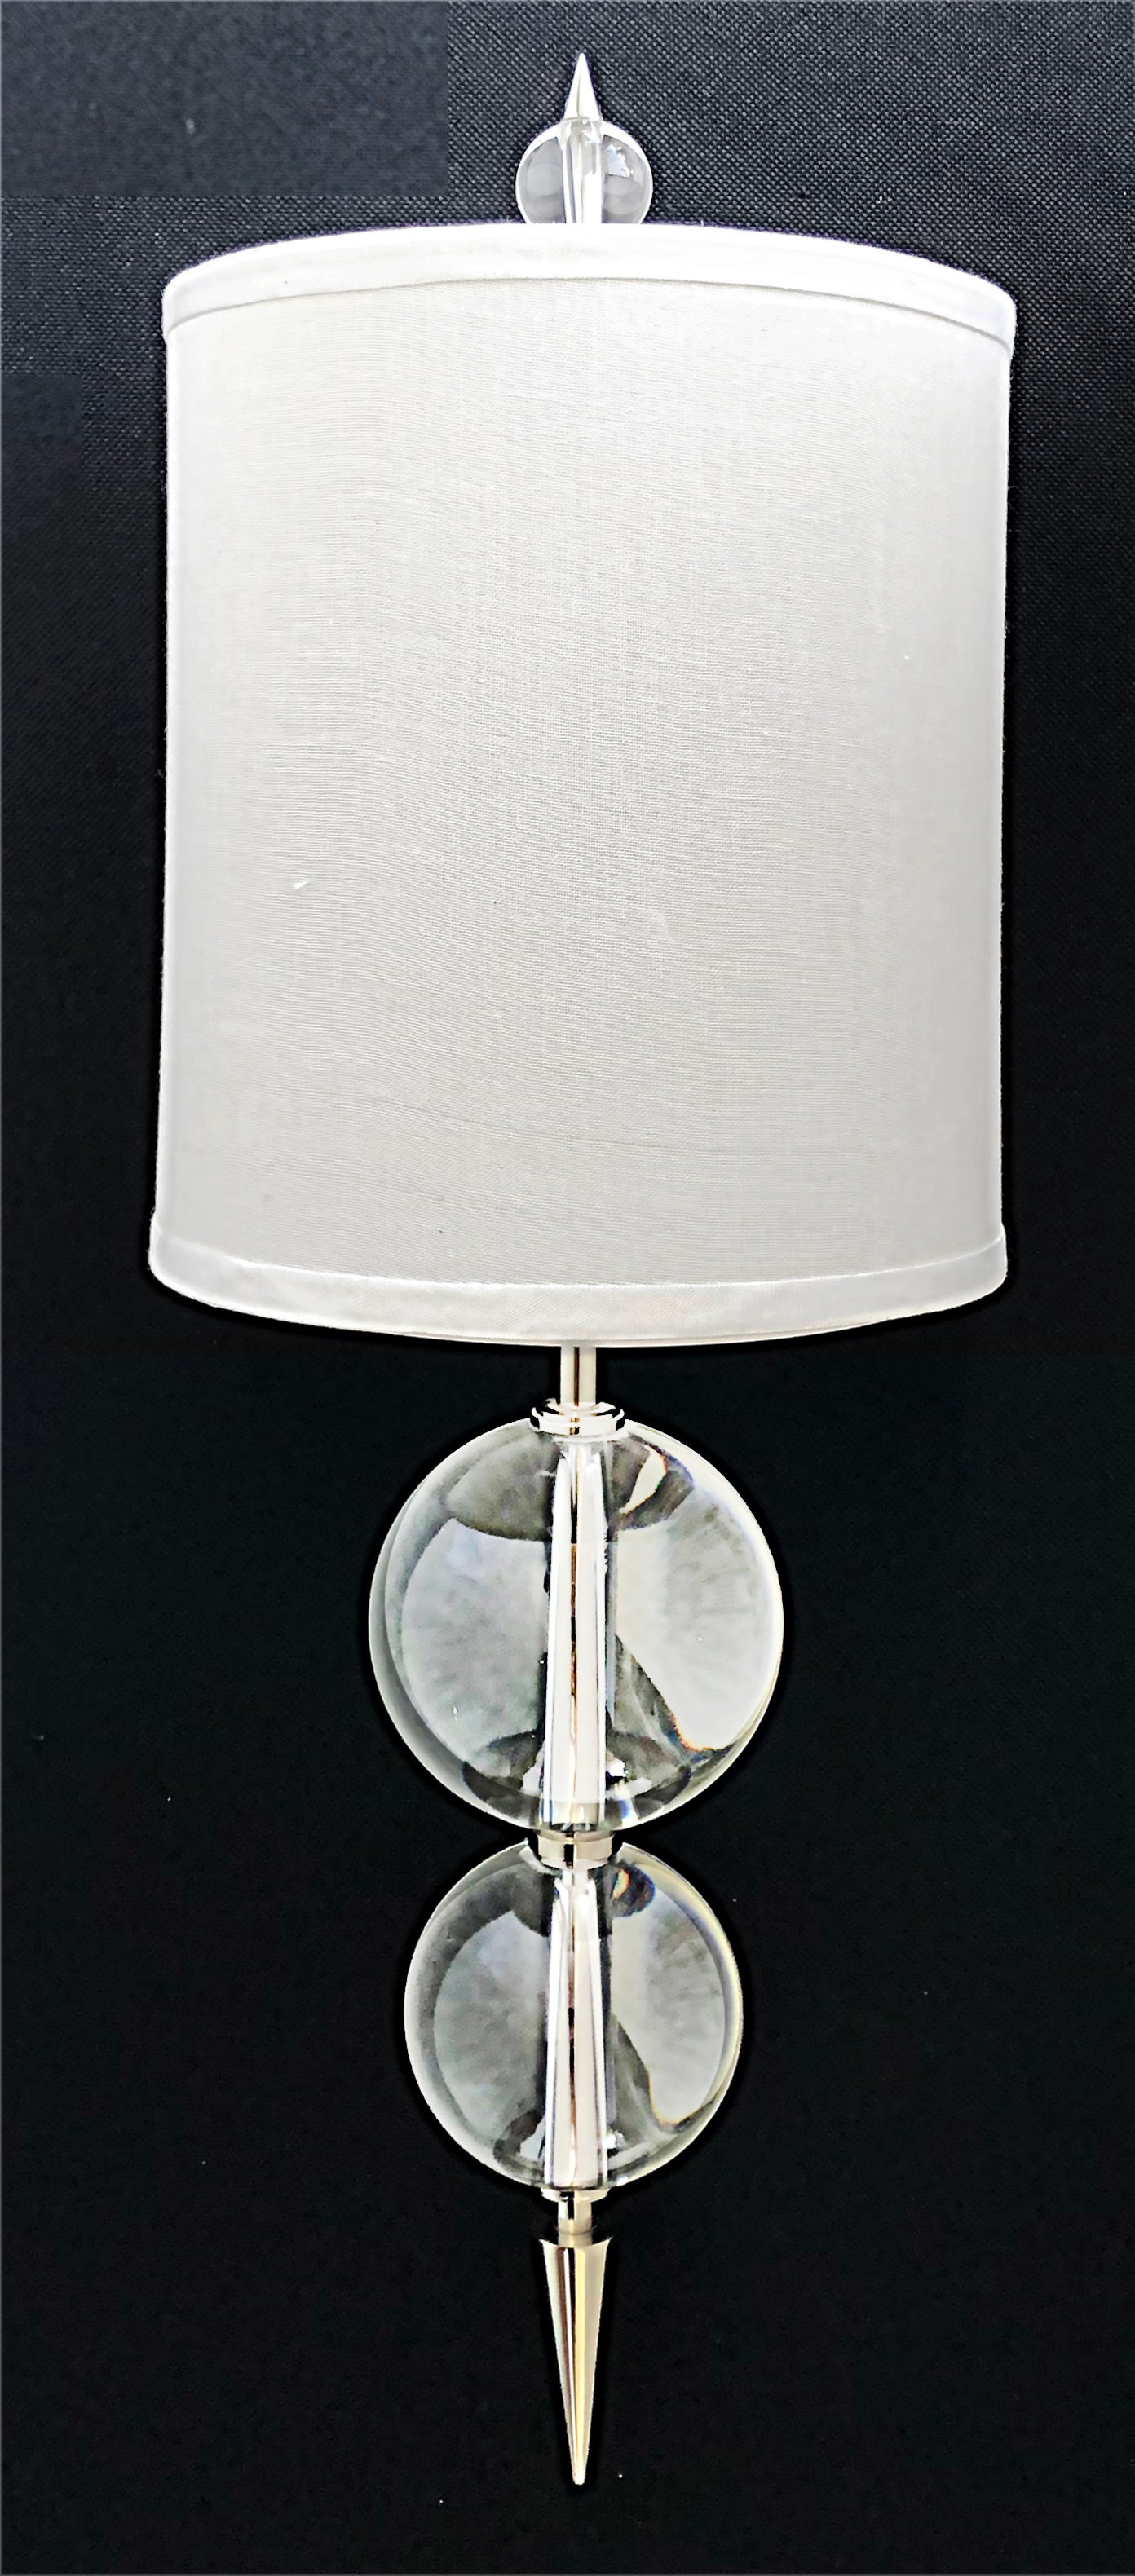 Stainless Steel Glass Ball Wall Sconces with Shades, Finials In Good Condition For Sale In Miami, FL